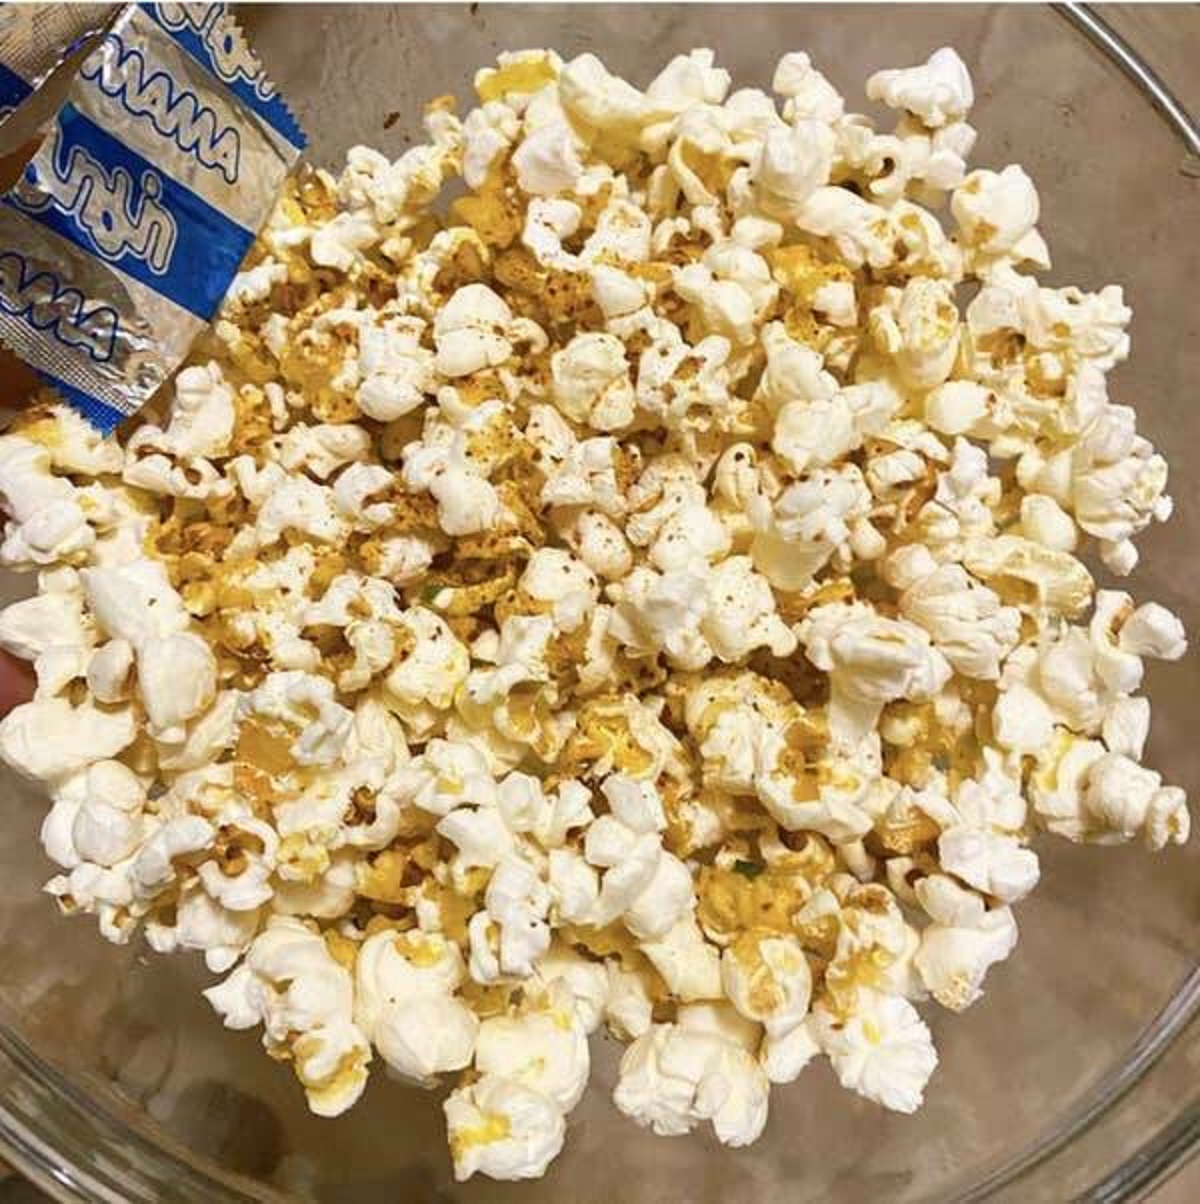 "Hear me out: A ramen packet makes awesome popcorn seasoning! Mix the powder with some melted butter or margarine and then toss with the popcorn. Add chili powder for an extra kick."